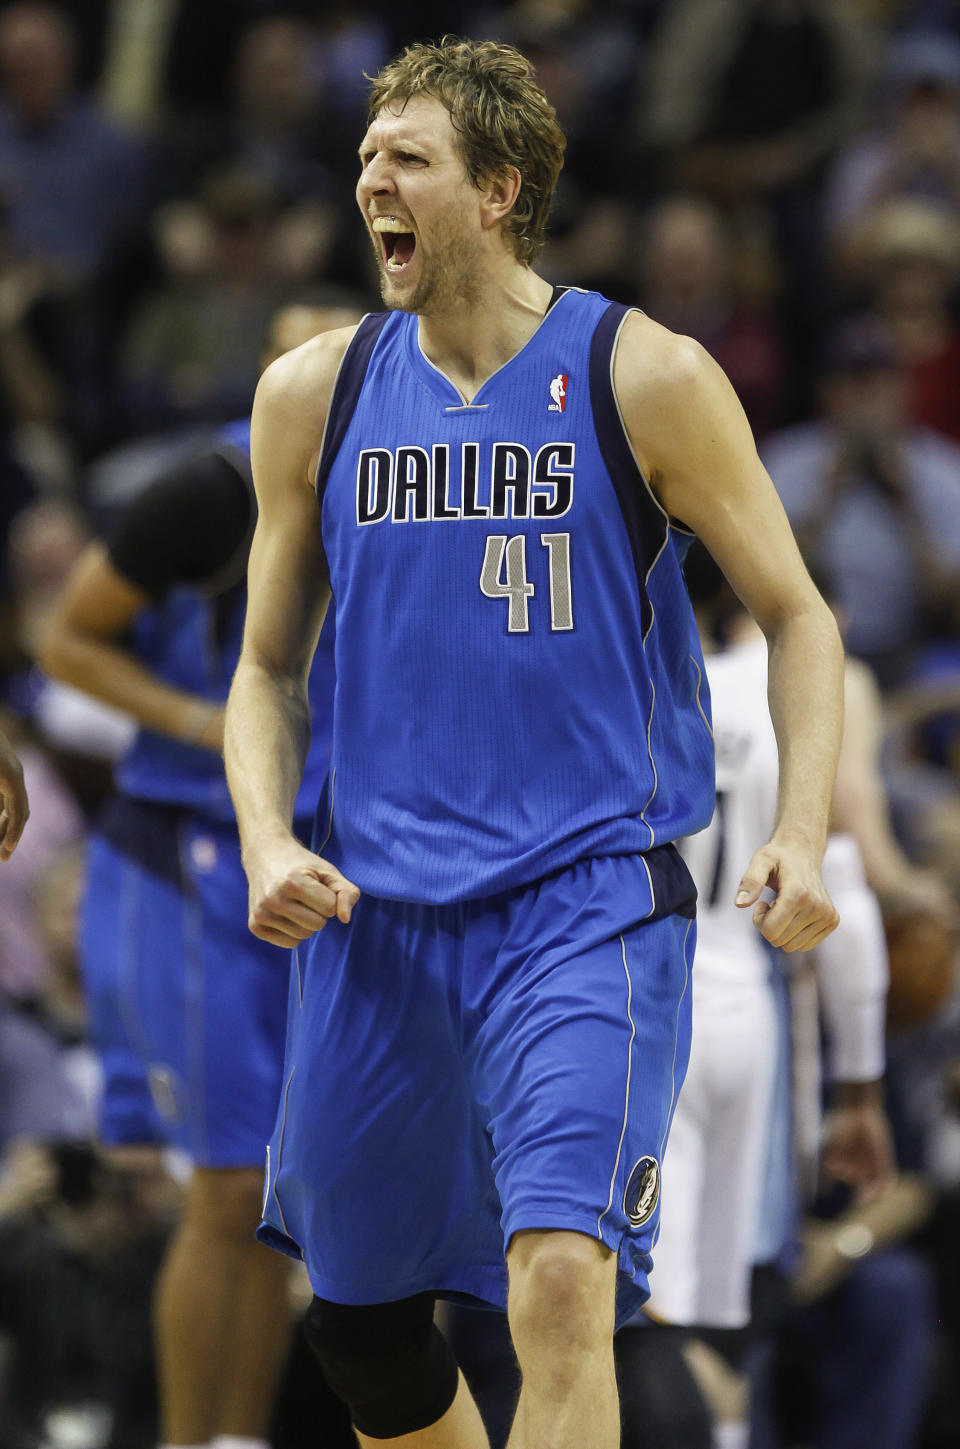 Dallas Mavericks forward Dirk Nowitzki (41), of Germany, cries out after scoring against the Memphis Grizzlies in the second half of an NBA basketball game Wednesday, April 16, 2014, in Memphis, Tenn. The Grizzlies won in overtime 106-105. (AP Photo/Lance Murphey)